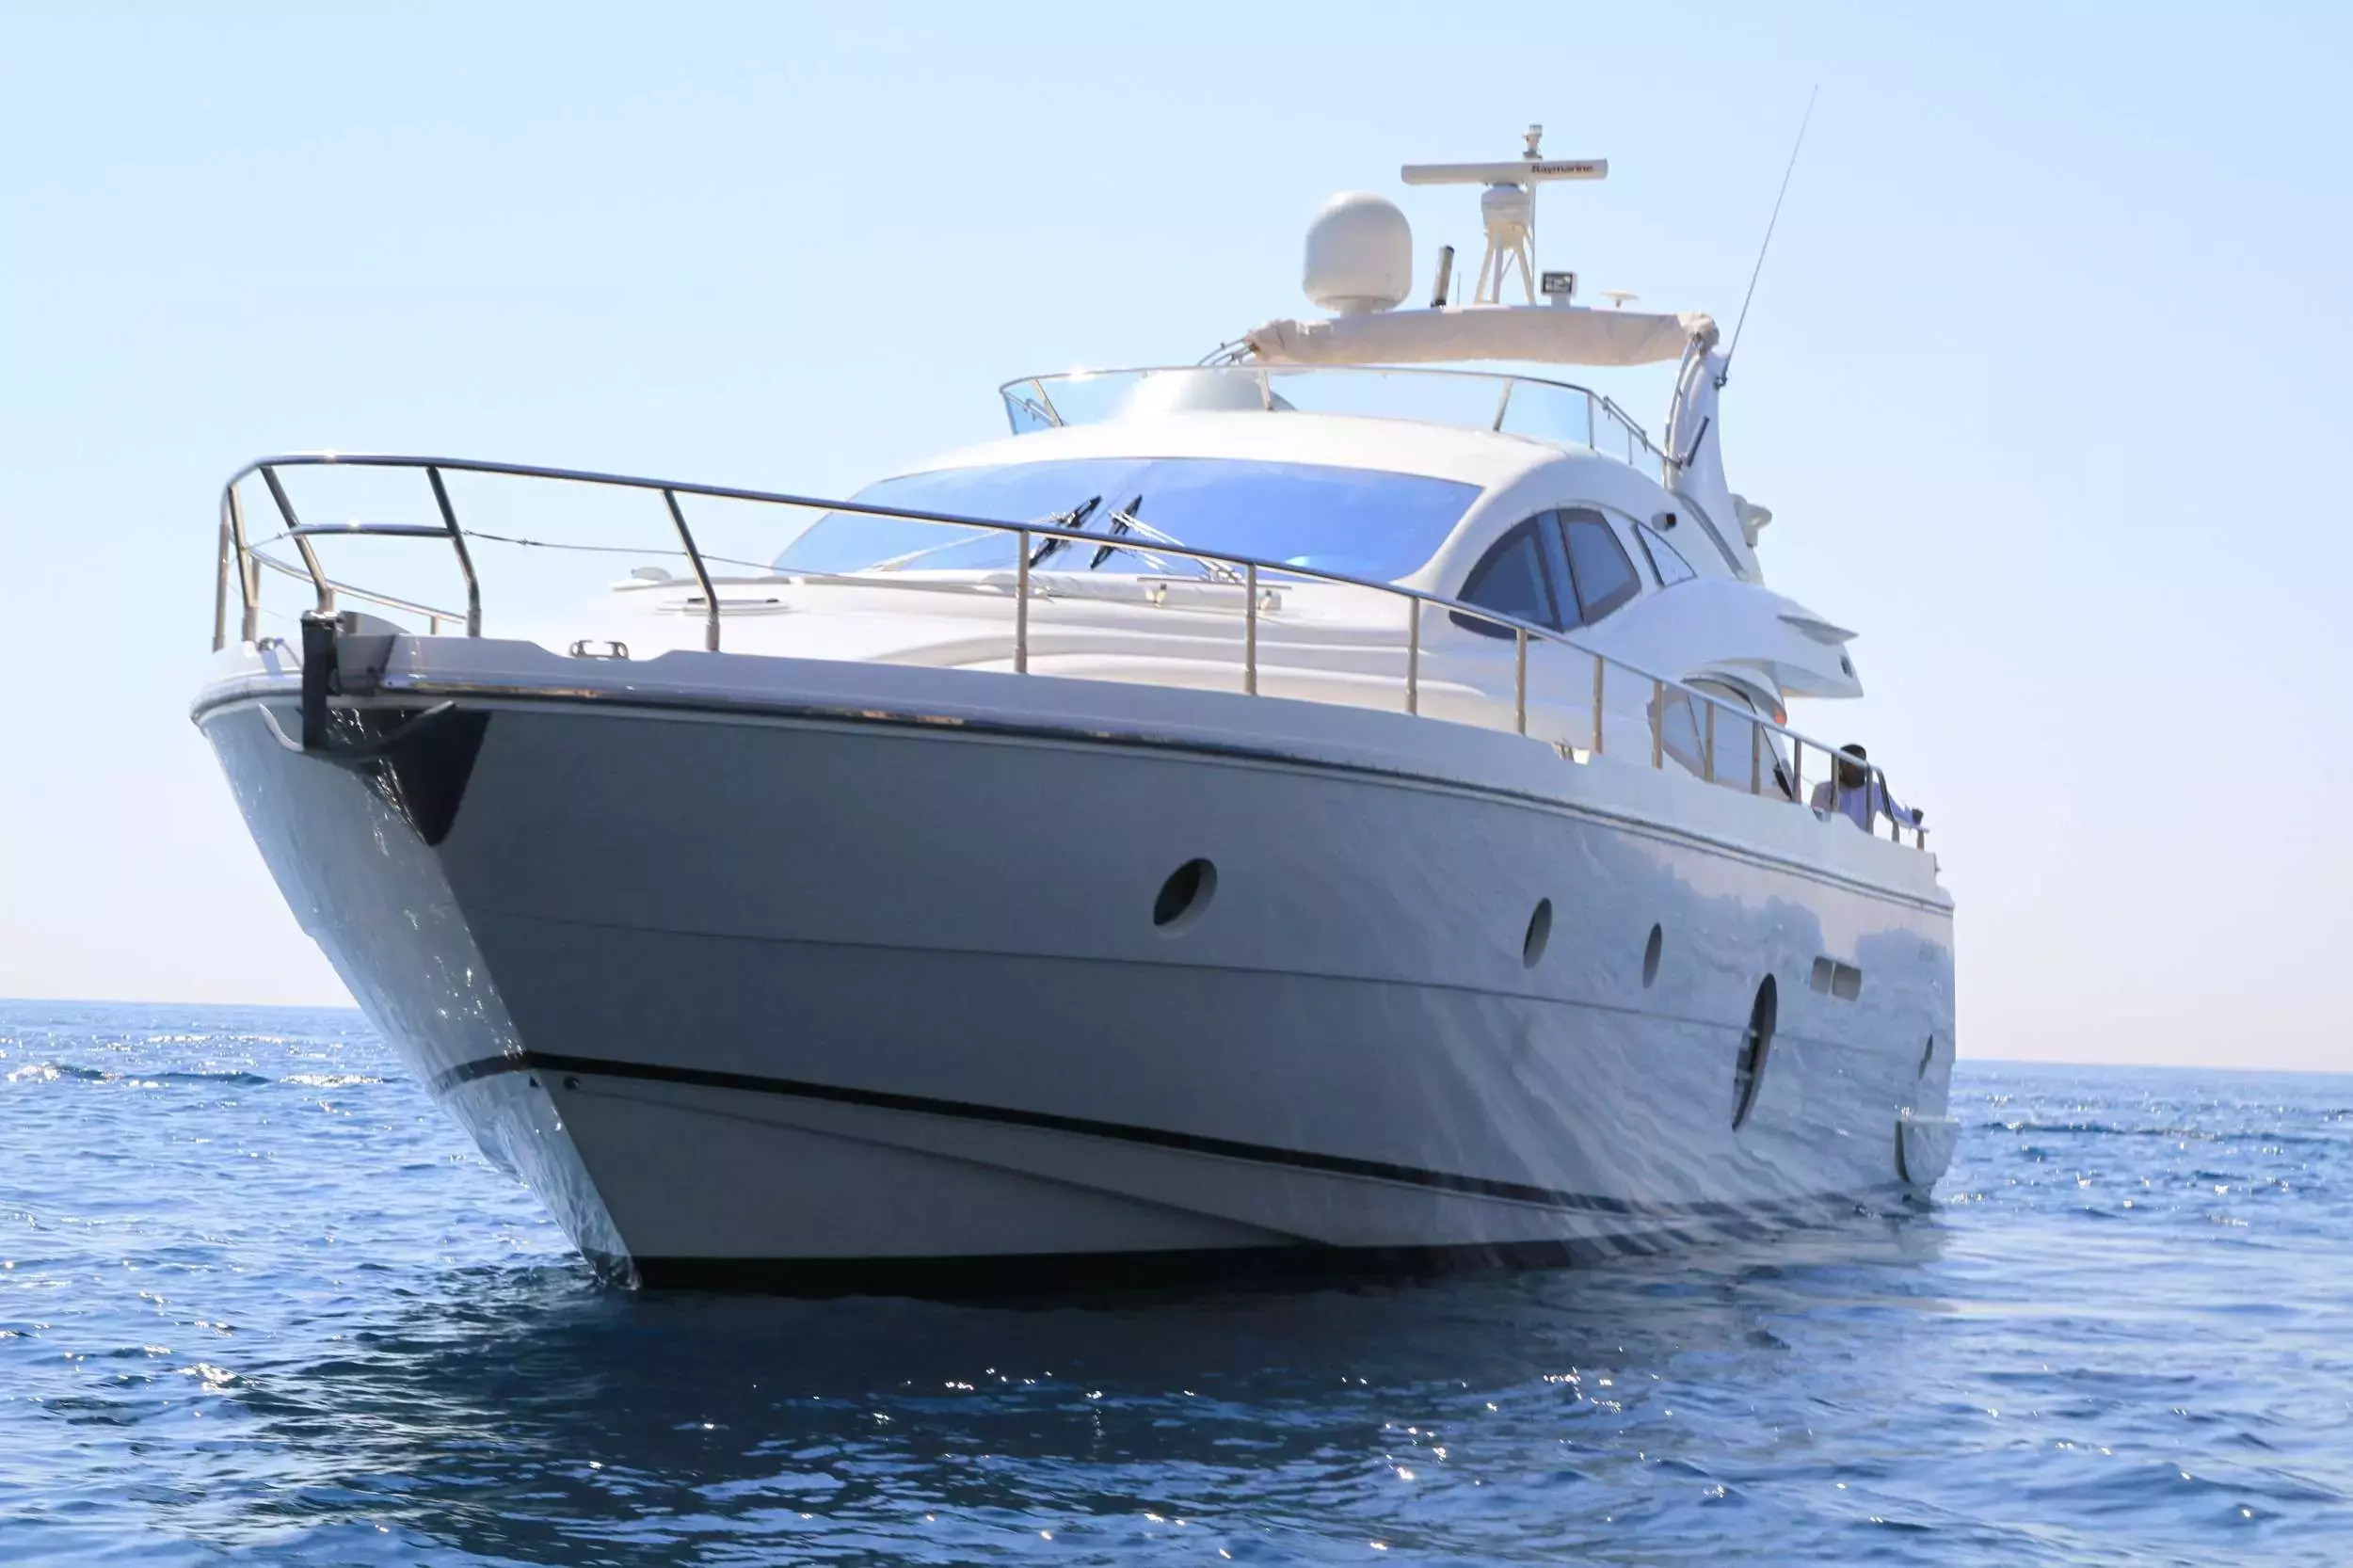 Cinzia by Aicon - Top rates for a Charter of a private Motor Yacht in Malta